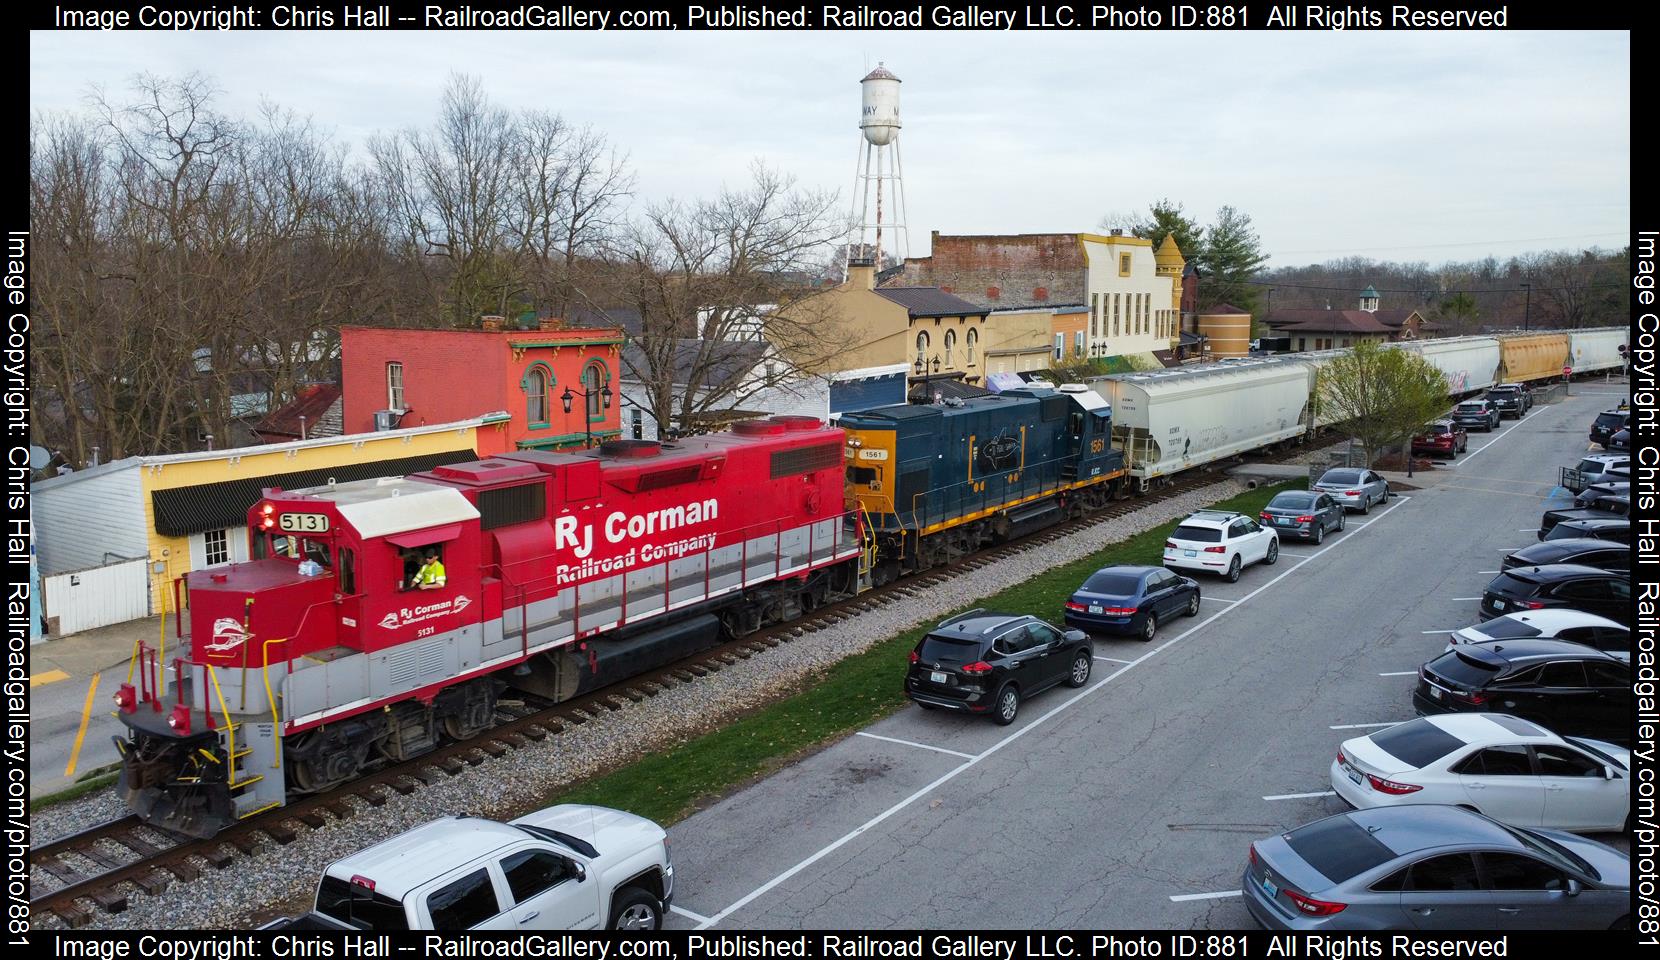 RJCC 5131 is a class EMD GP38-2 and  is pictured in Midway, Kentucky, United States.  This was taken along the Old Road on the RJ Corman. Photo Copyright: Chris Hall uploaded to Railroad Gallery on 03/26/2023. This photograph of RJCC 5131 was taken on Sunday, March 05, 2023. All Rights Reserved. 